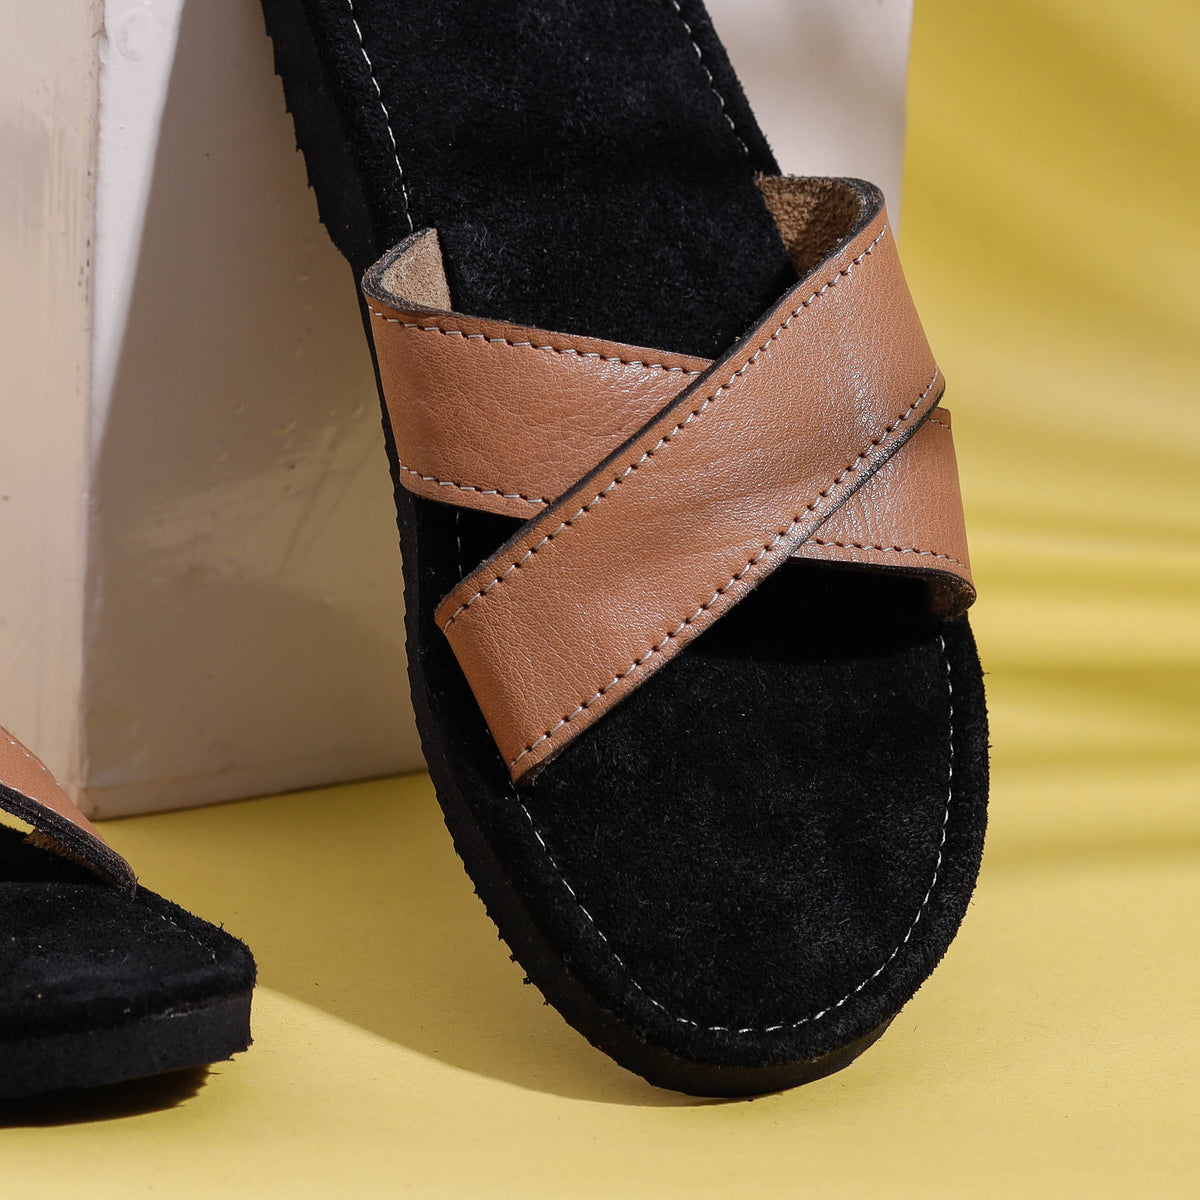 Black &amp; Tan Handcrafted Women&#39;s Leather Slippers with Suede